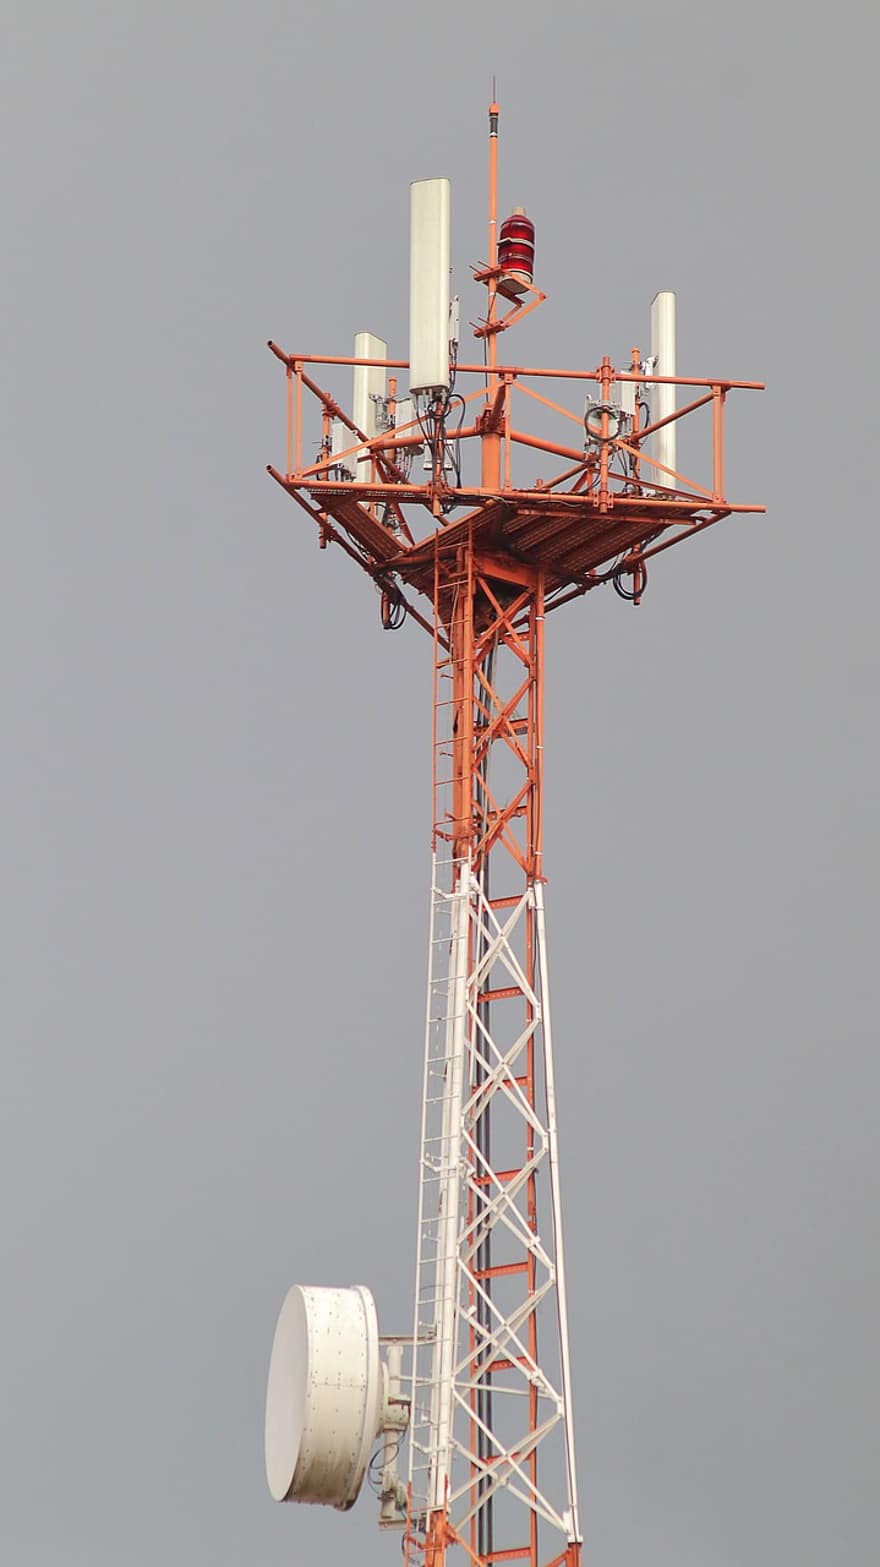 Telecommunications Tower, Radio Mast, Tower, Antenna, Mast, Structure, Telecommunications, Frequency, Transmission, Connection